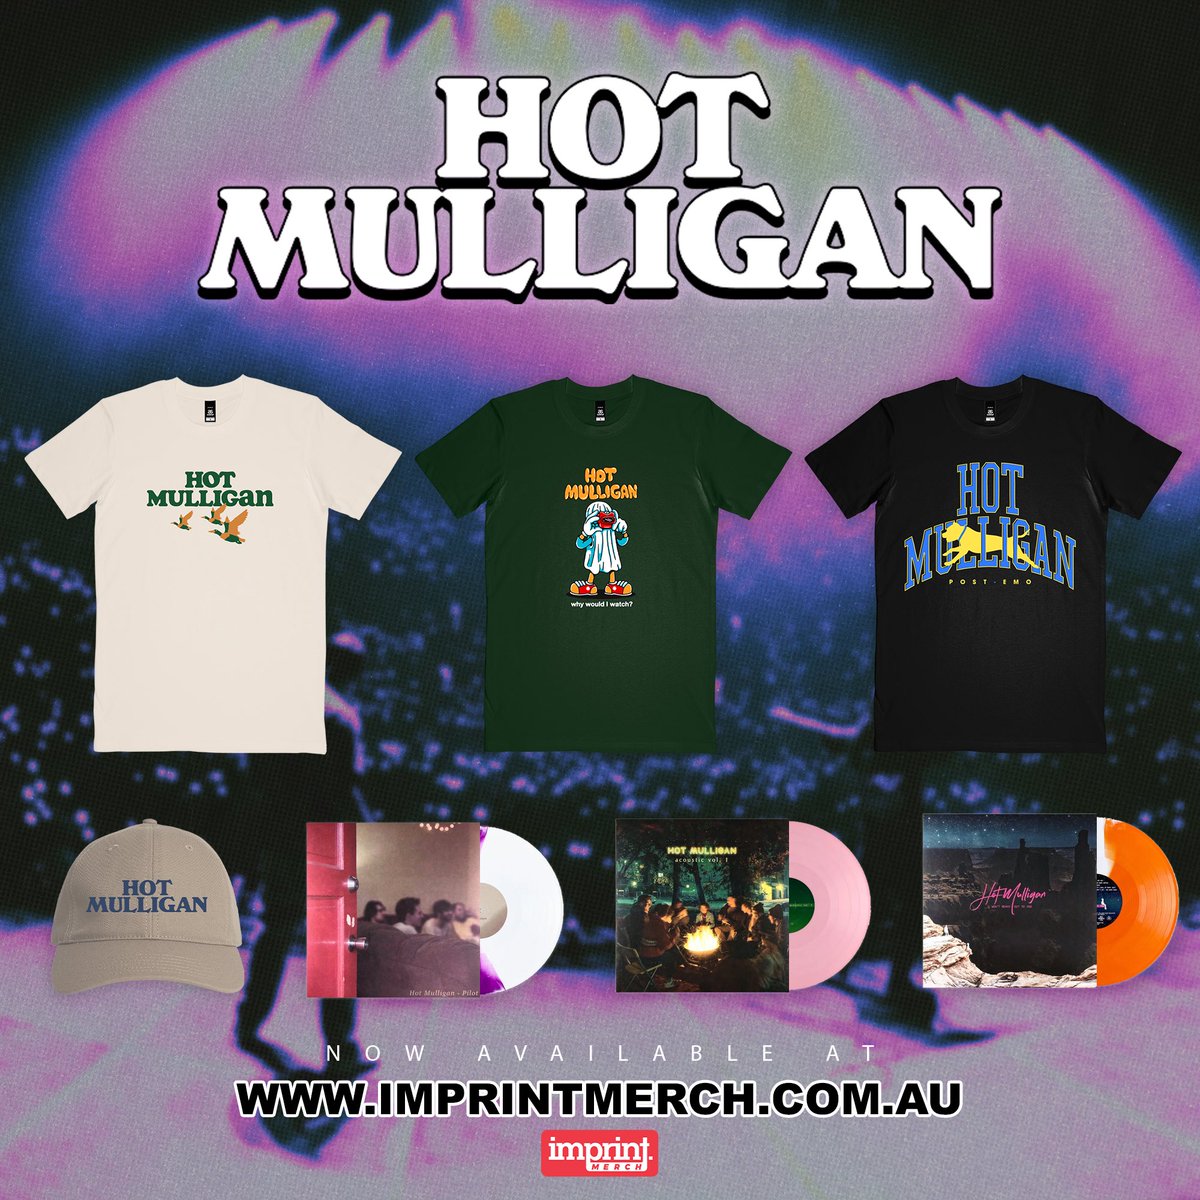 Miss out on some @HotMulligan merch while they were here last month? Restocks available online now. Get yourself a shirt, hat and some vinyl now while you can. imprintmerch.com.au/collections/ho…